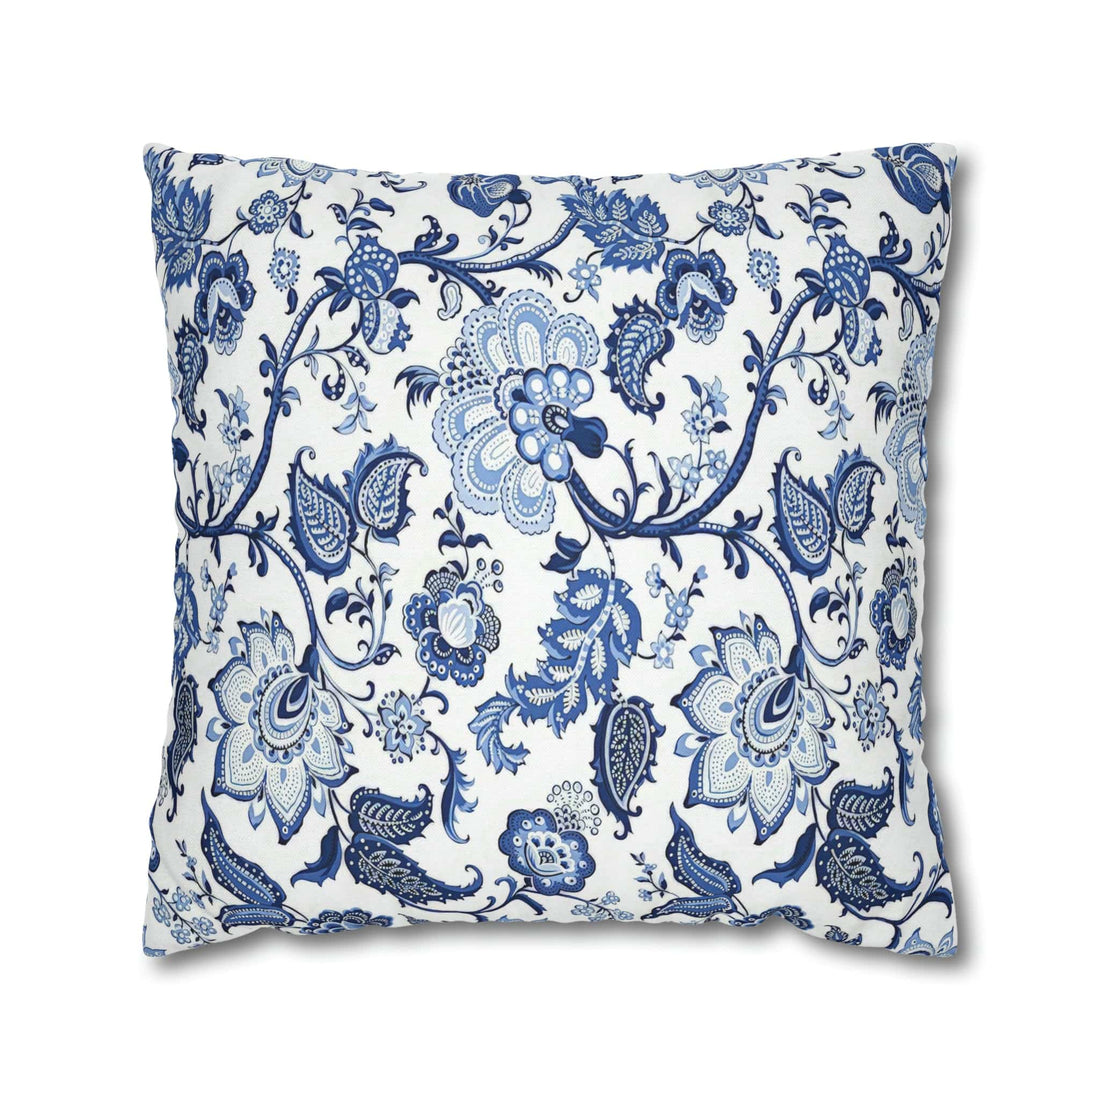 Kate McEnroe New York Blue and White Floral Chinoiserie Jacobean Pillow CoverThrow Pillow Covers16082824544440583846